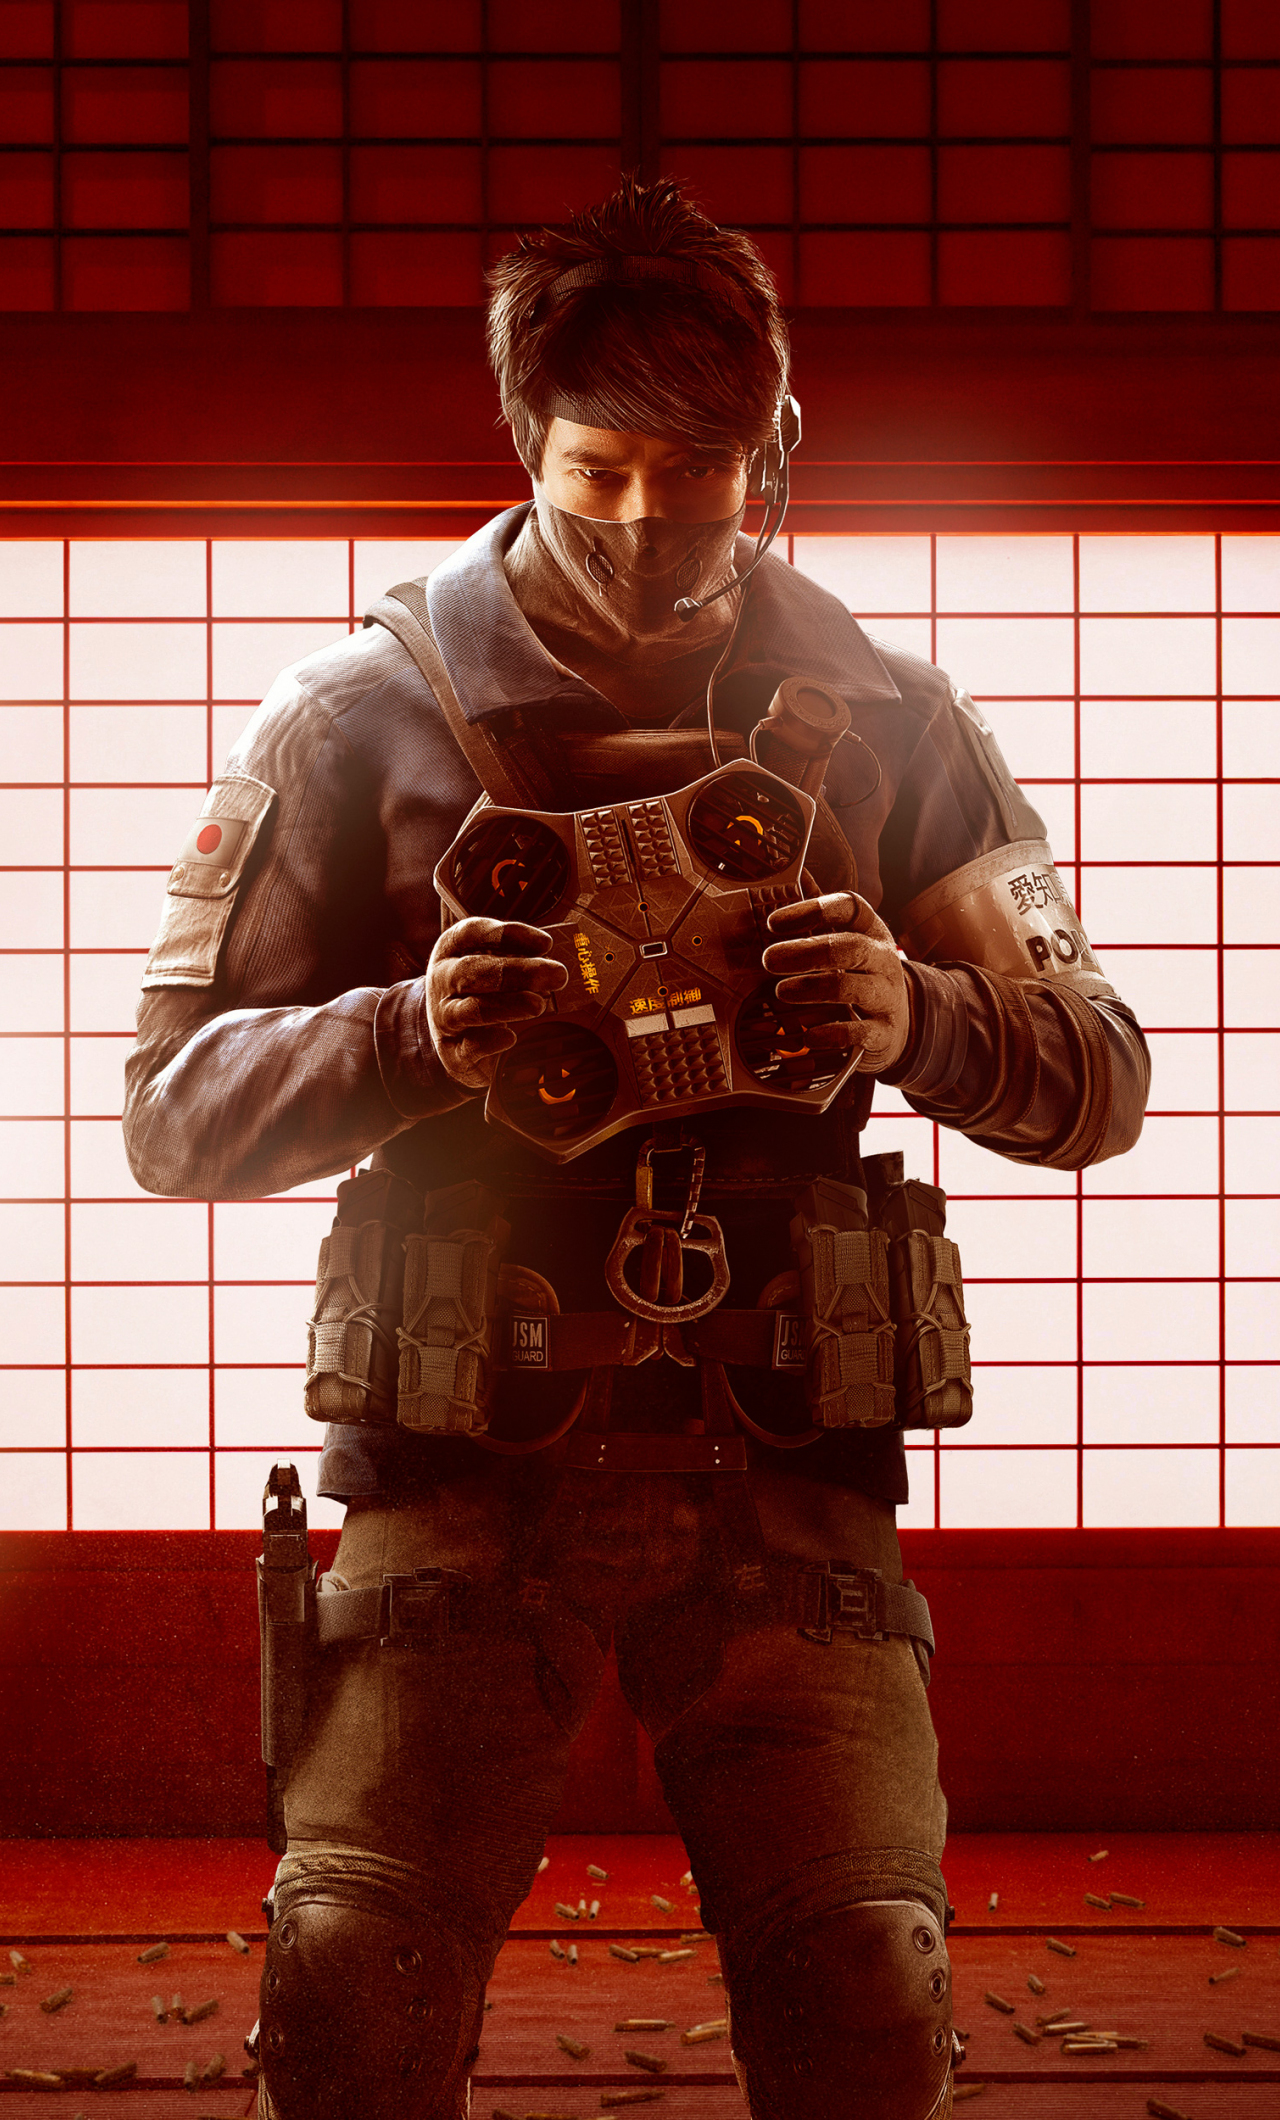 Download 1280x21 Wallpaper Echo Tom Clancy S Rainbow Six Siege Game Iphone 6 Plus 1280x21 Hd Image Background 851